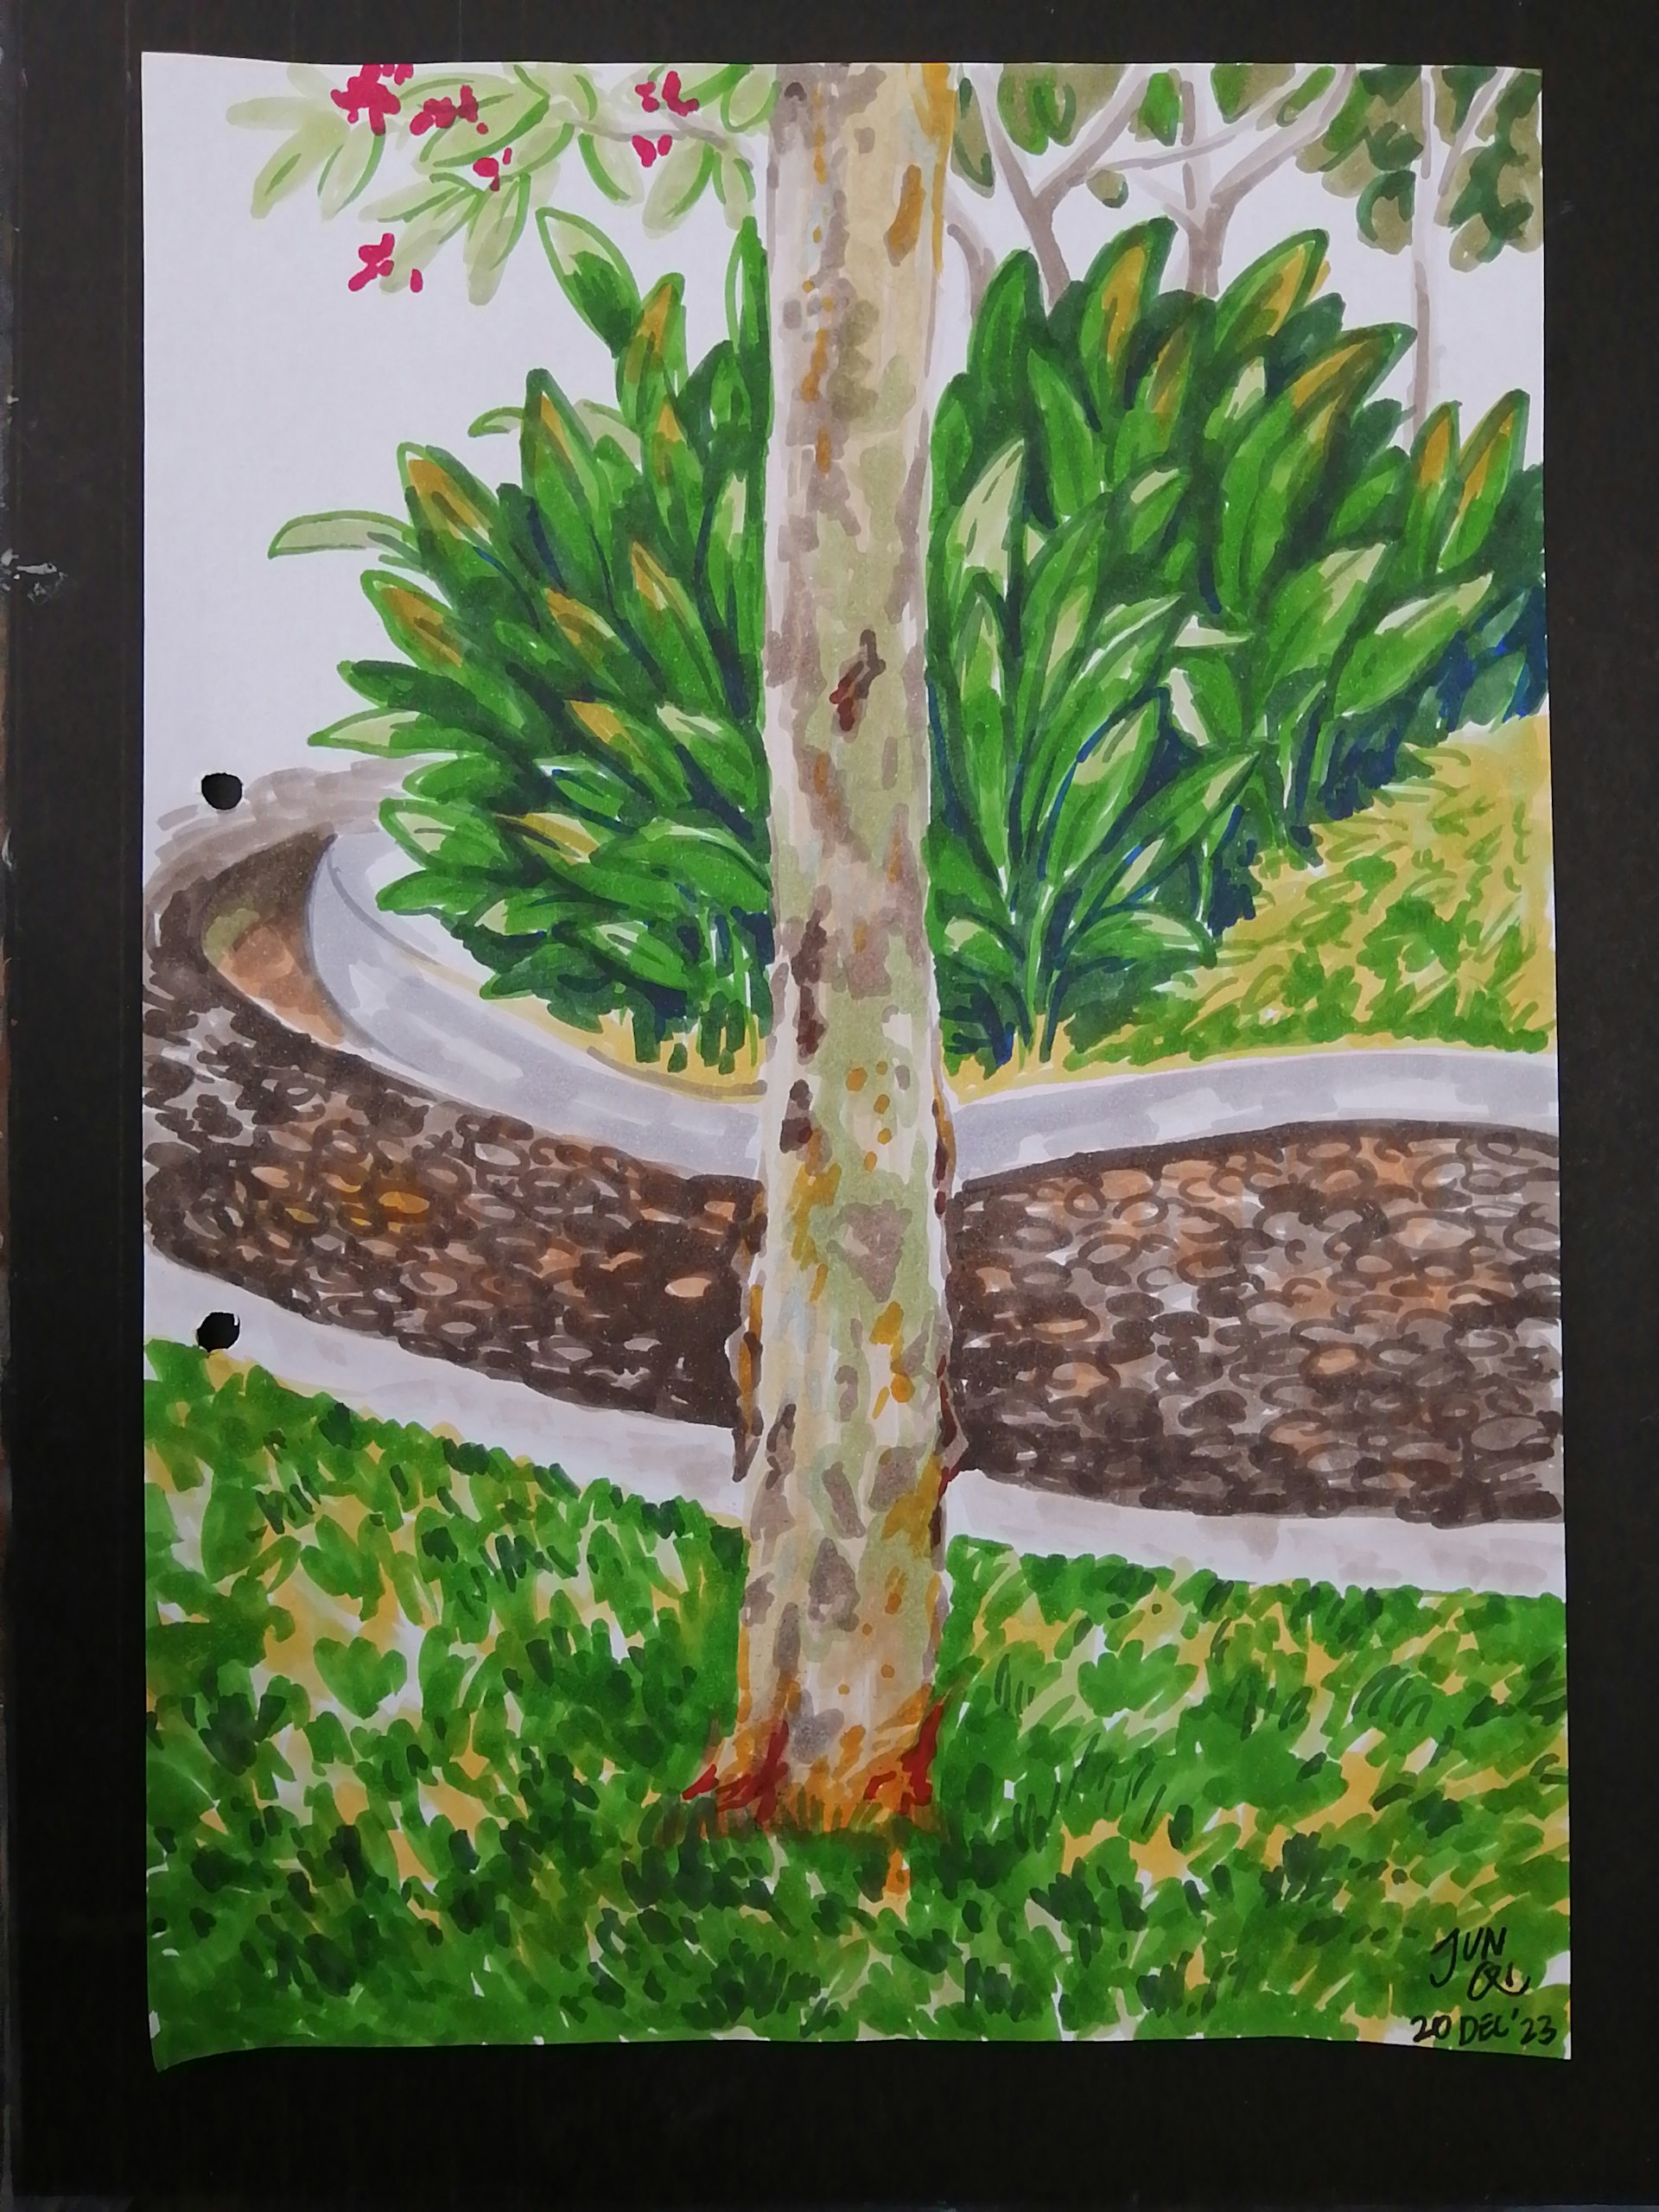 Sketch of a tree trunk with beautiful bark against grass, plants and a pebble pond.